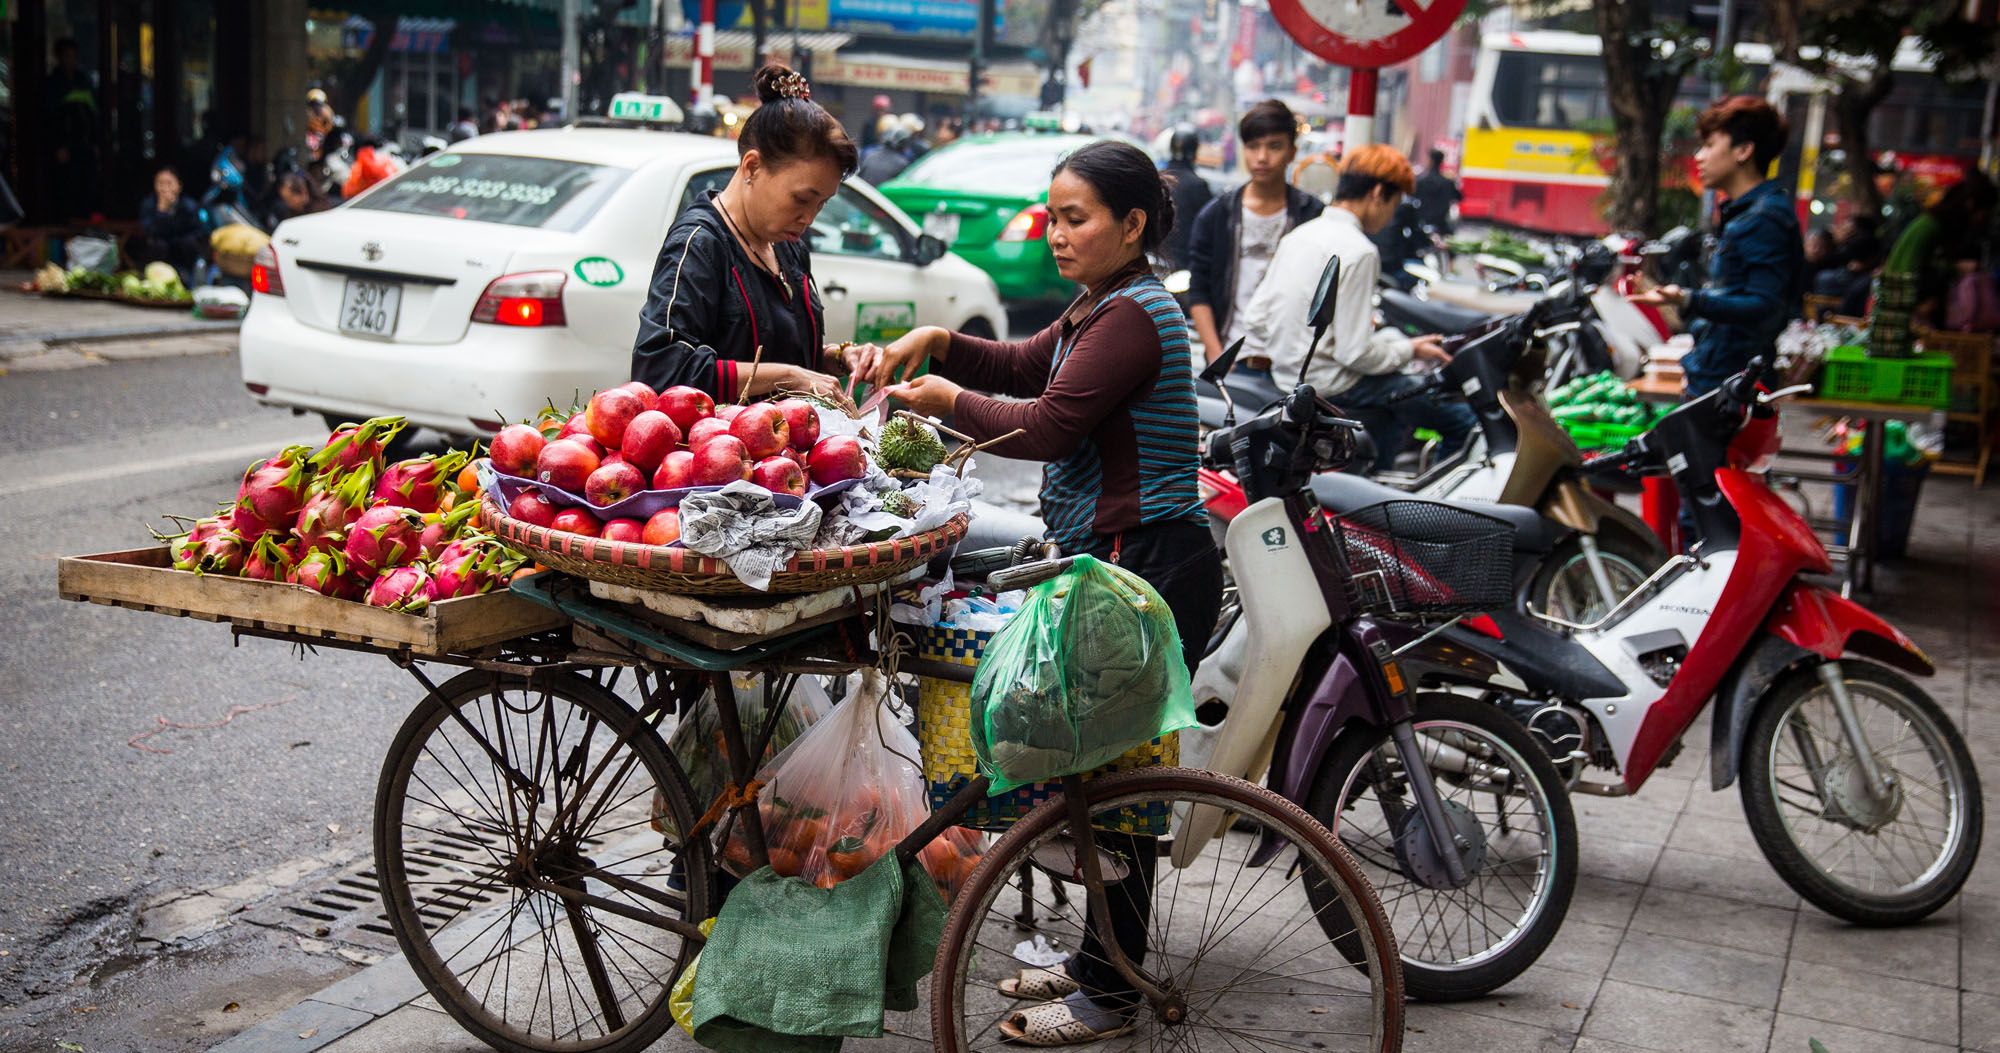 Featured image for “A Photojourney Through the Old Quarter of Hanoi”